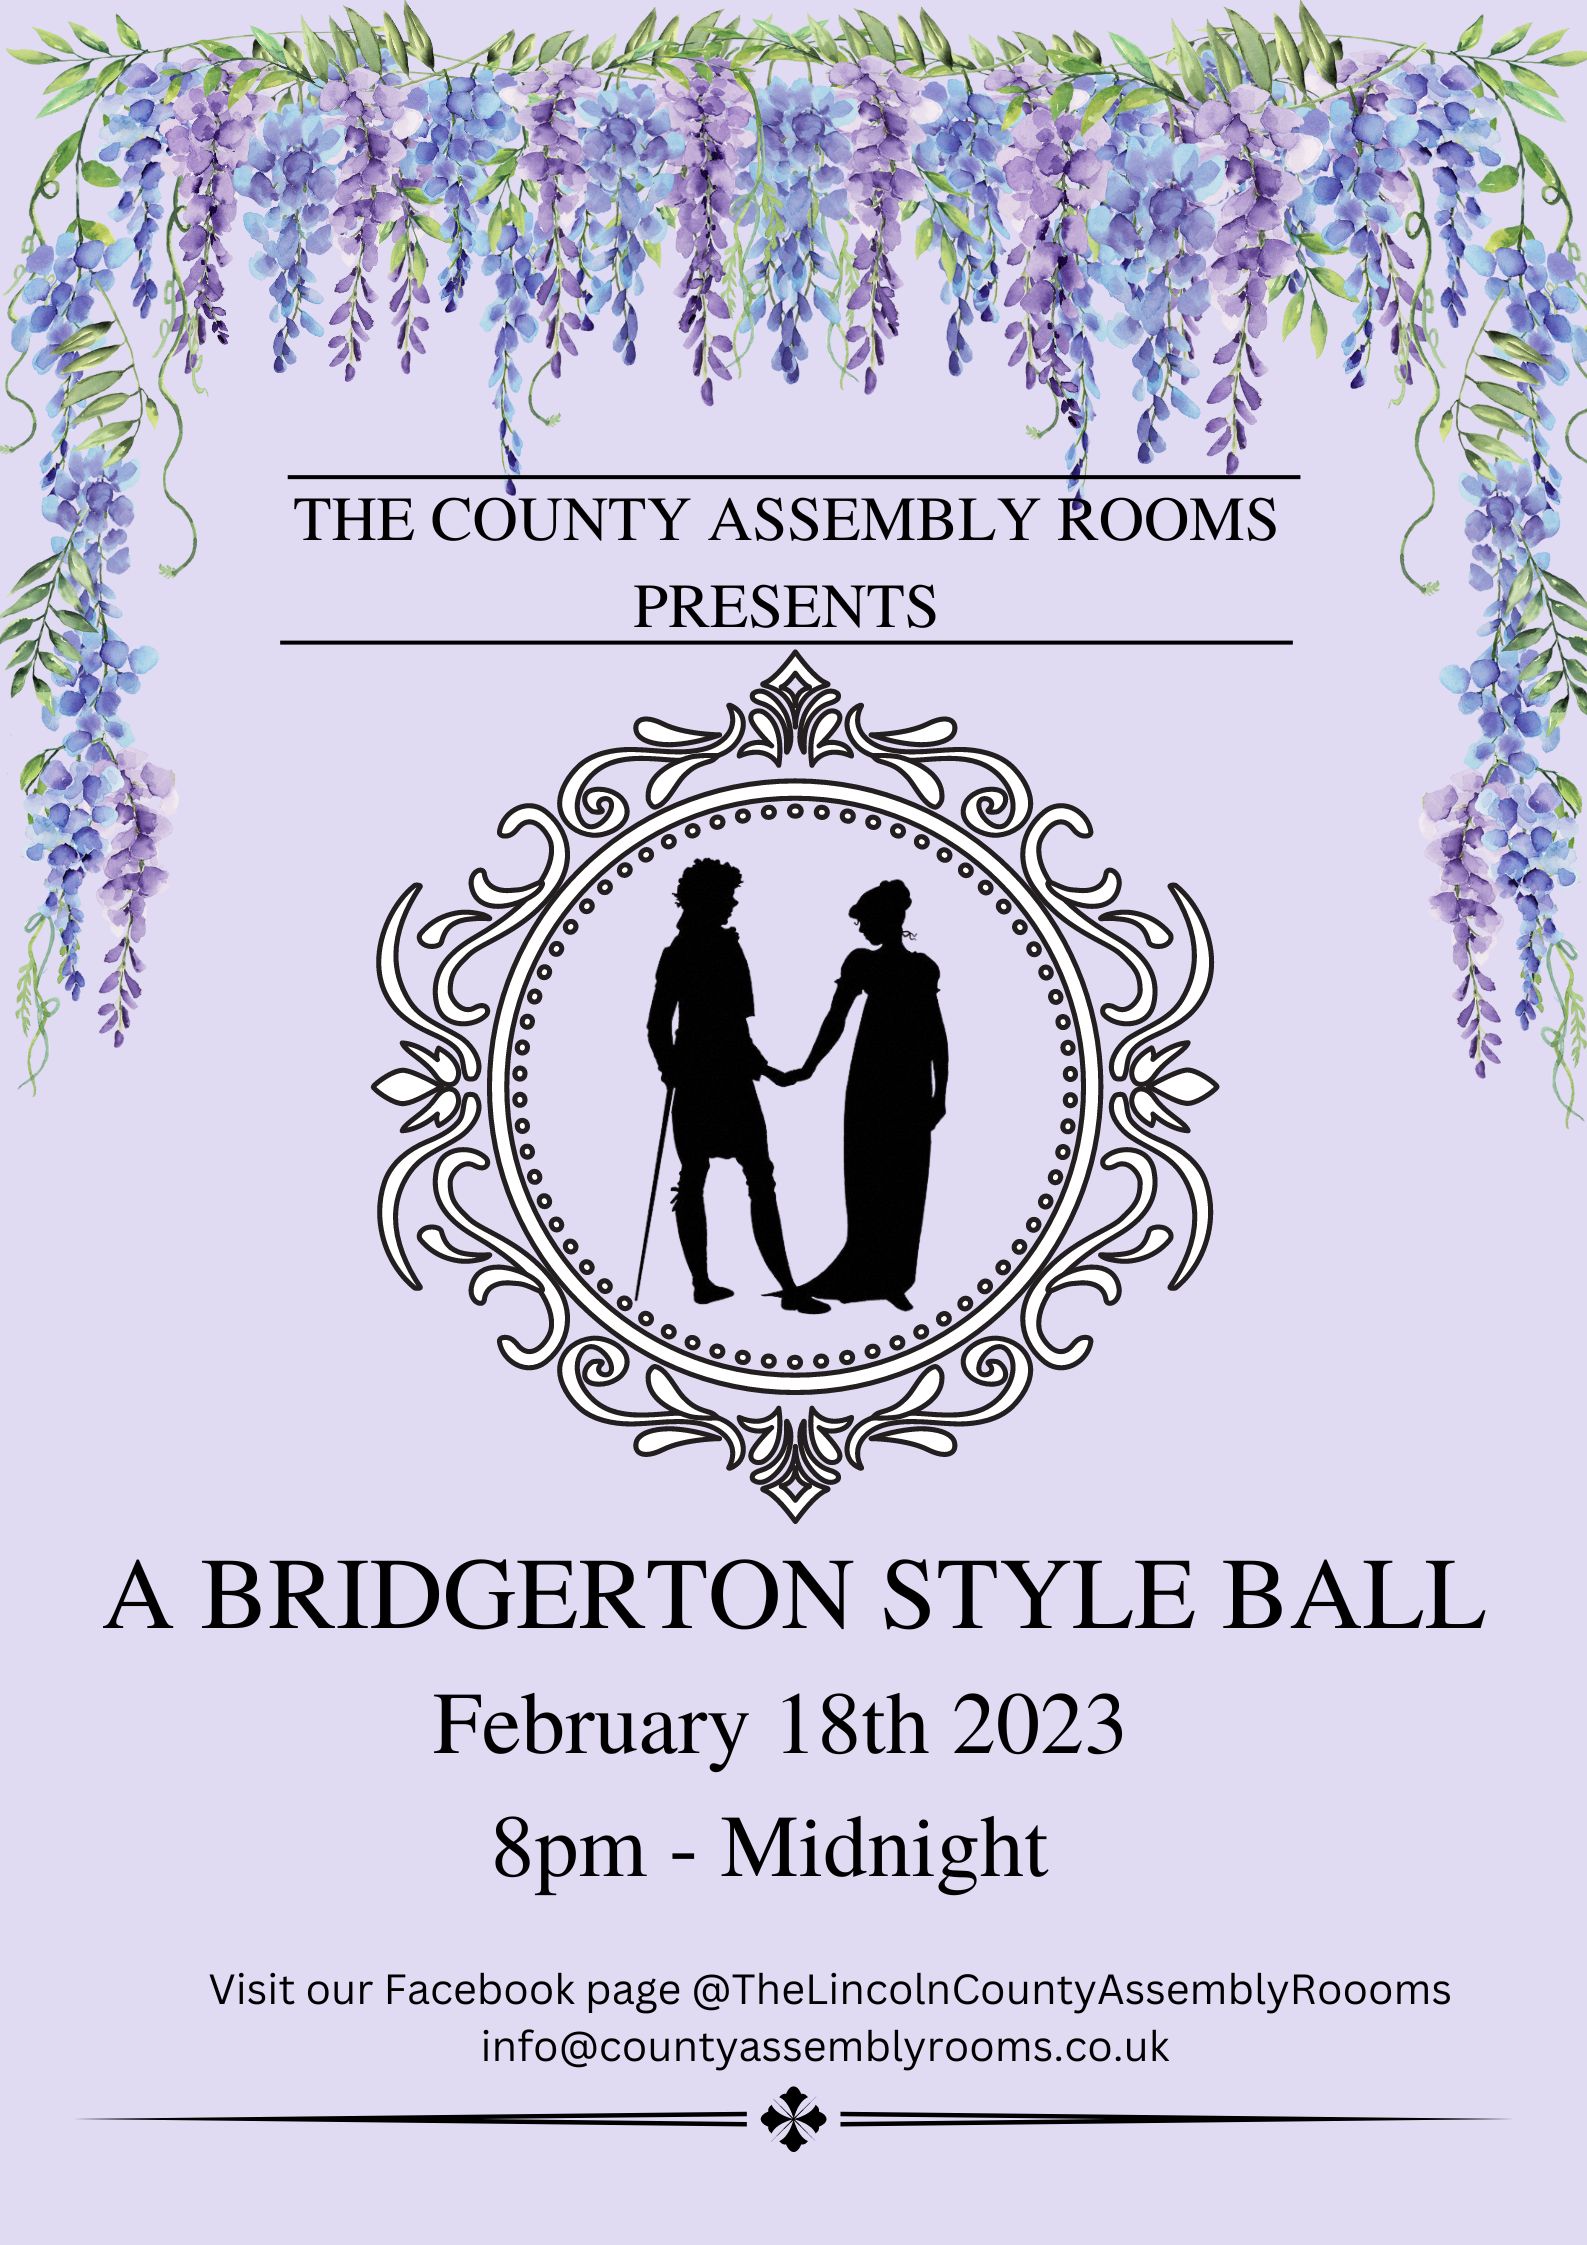 Bridgerton Style Ball at The County Assembly Rooms, Lincoln on 18th Feb